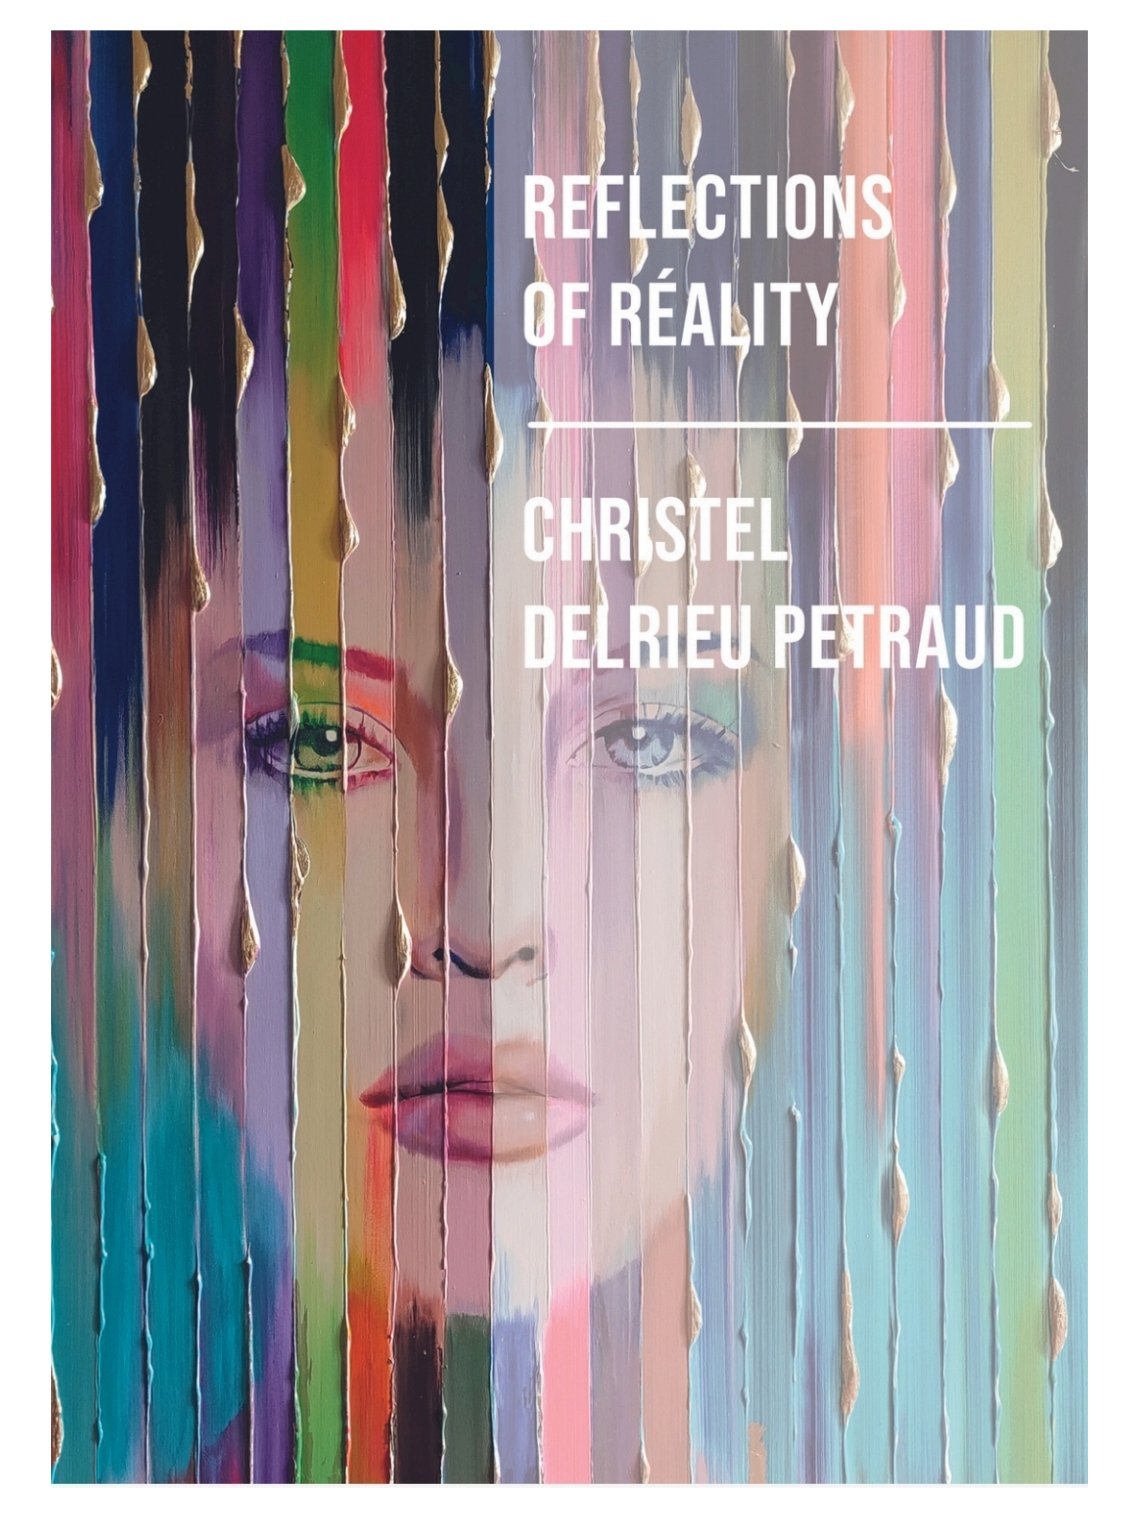 Reflections of reality by christel delrieu petraud